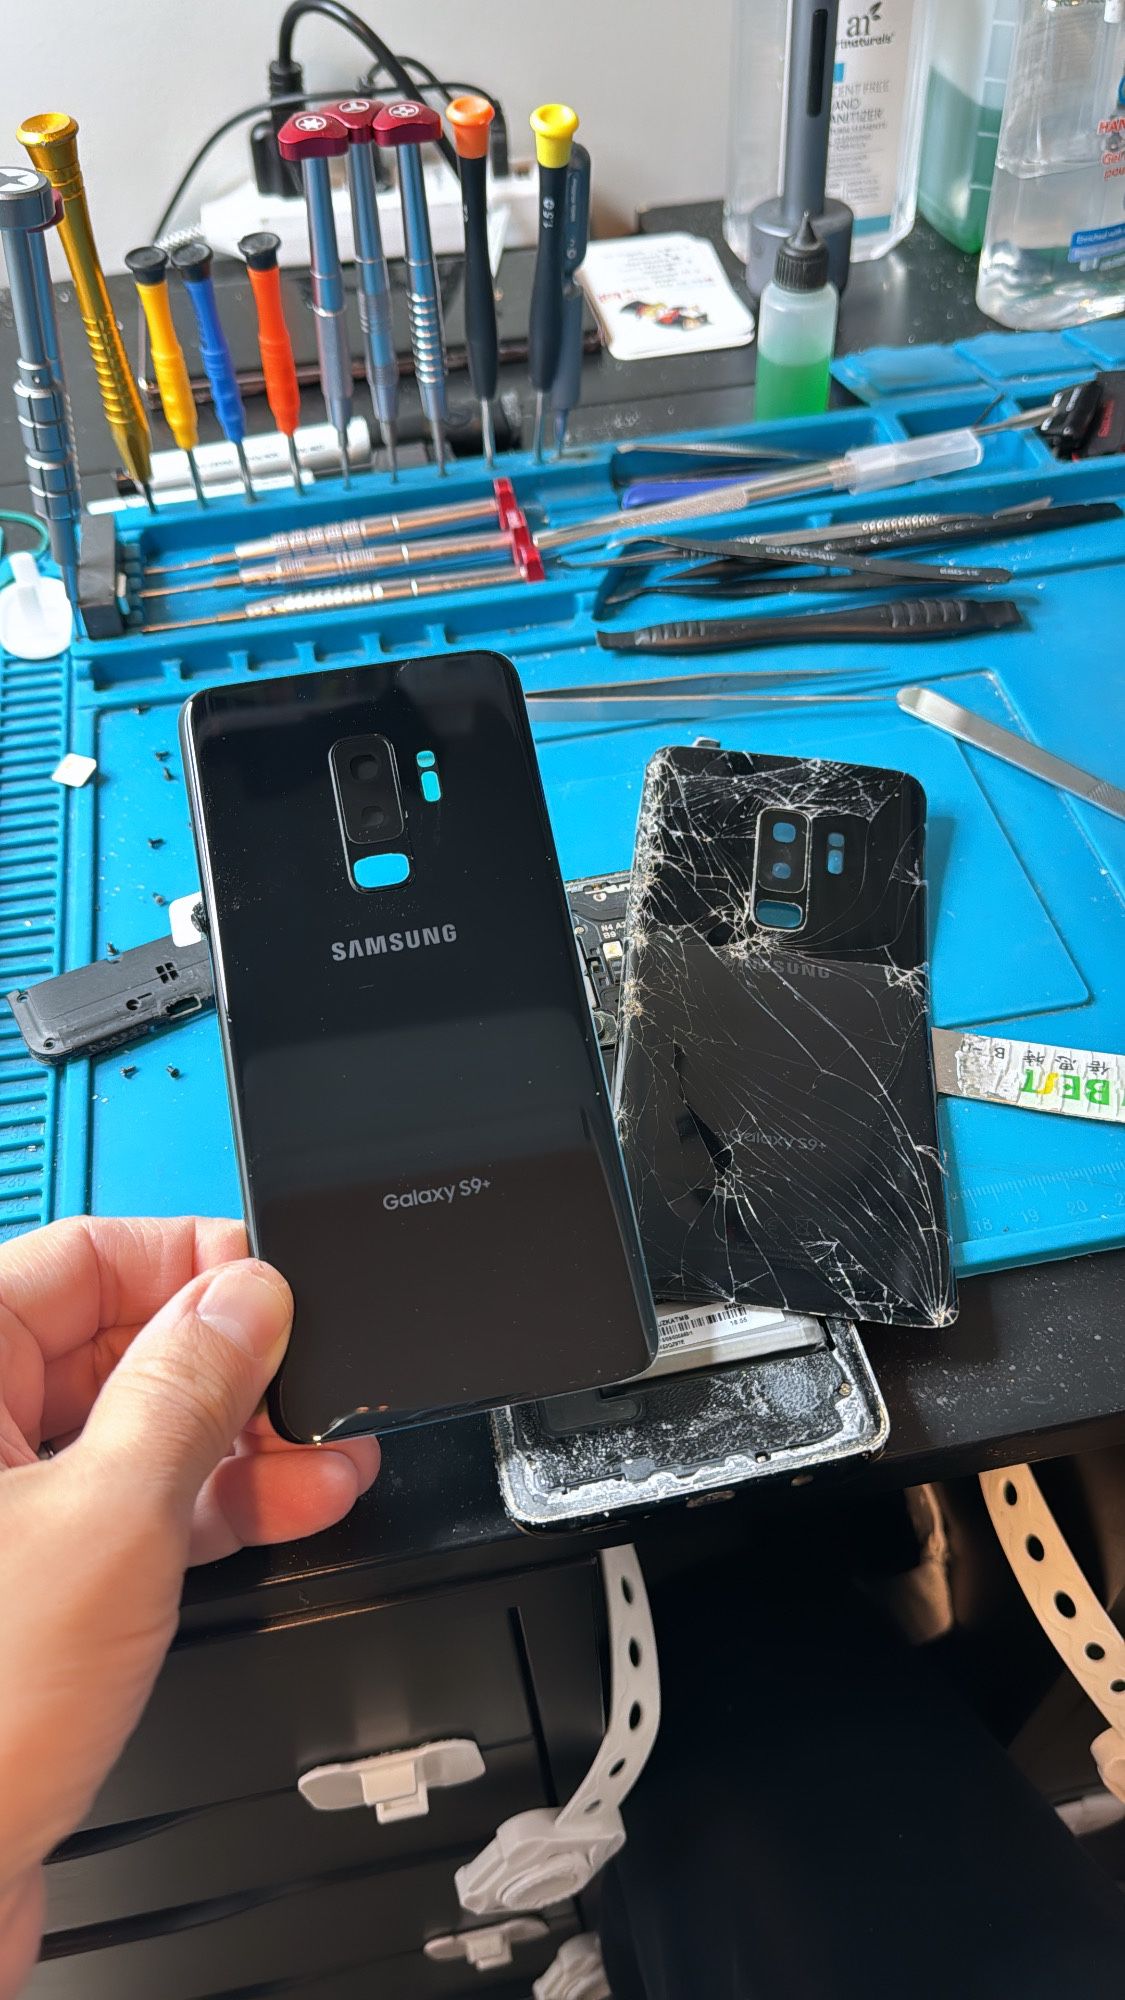 Samsung Back Glass Replacements Starting At $29